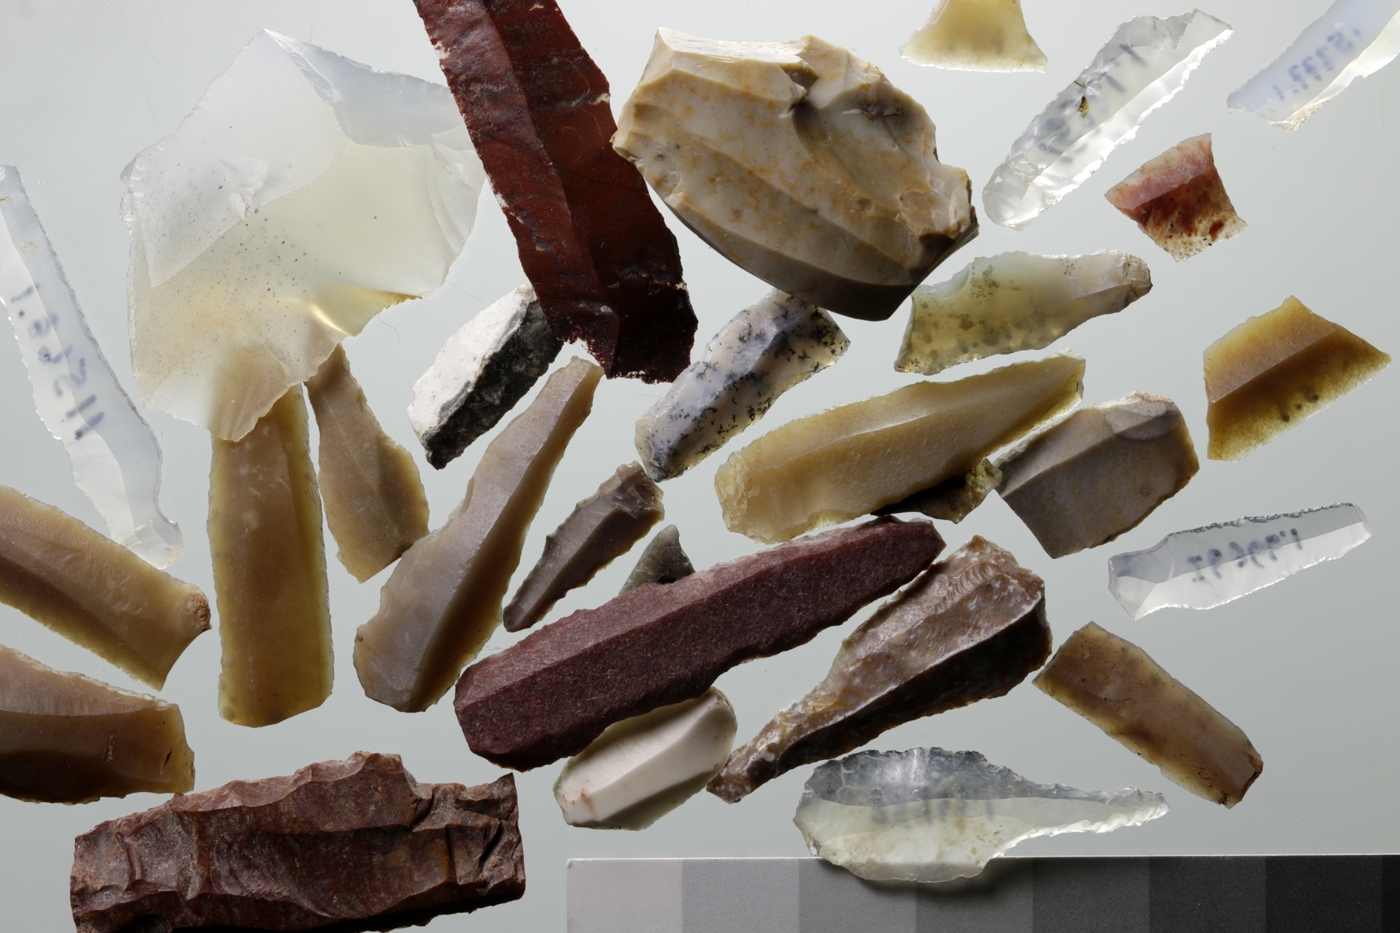 An array of chipped stone tools made on a variety of raw materials